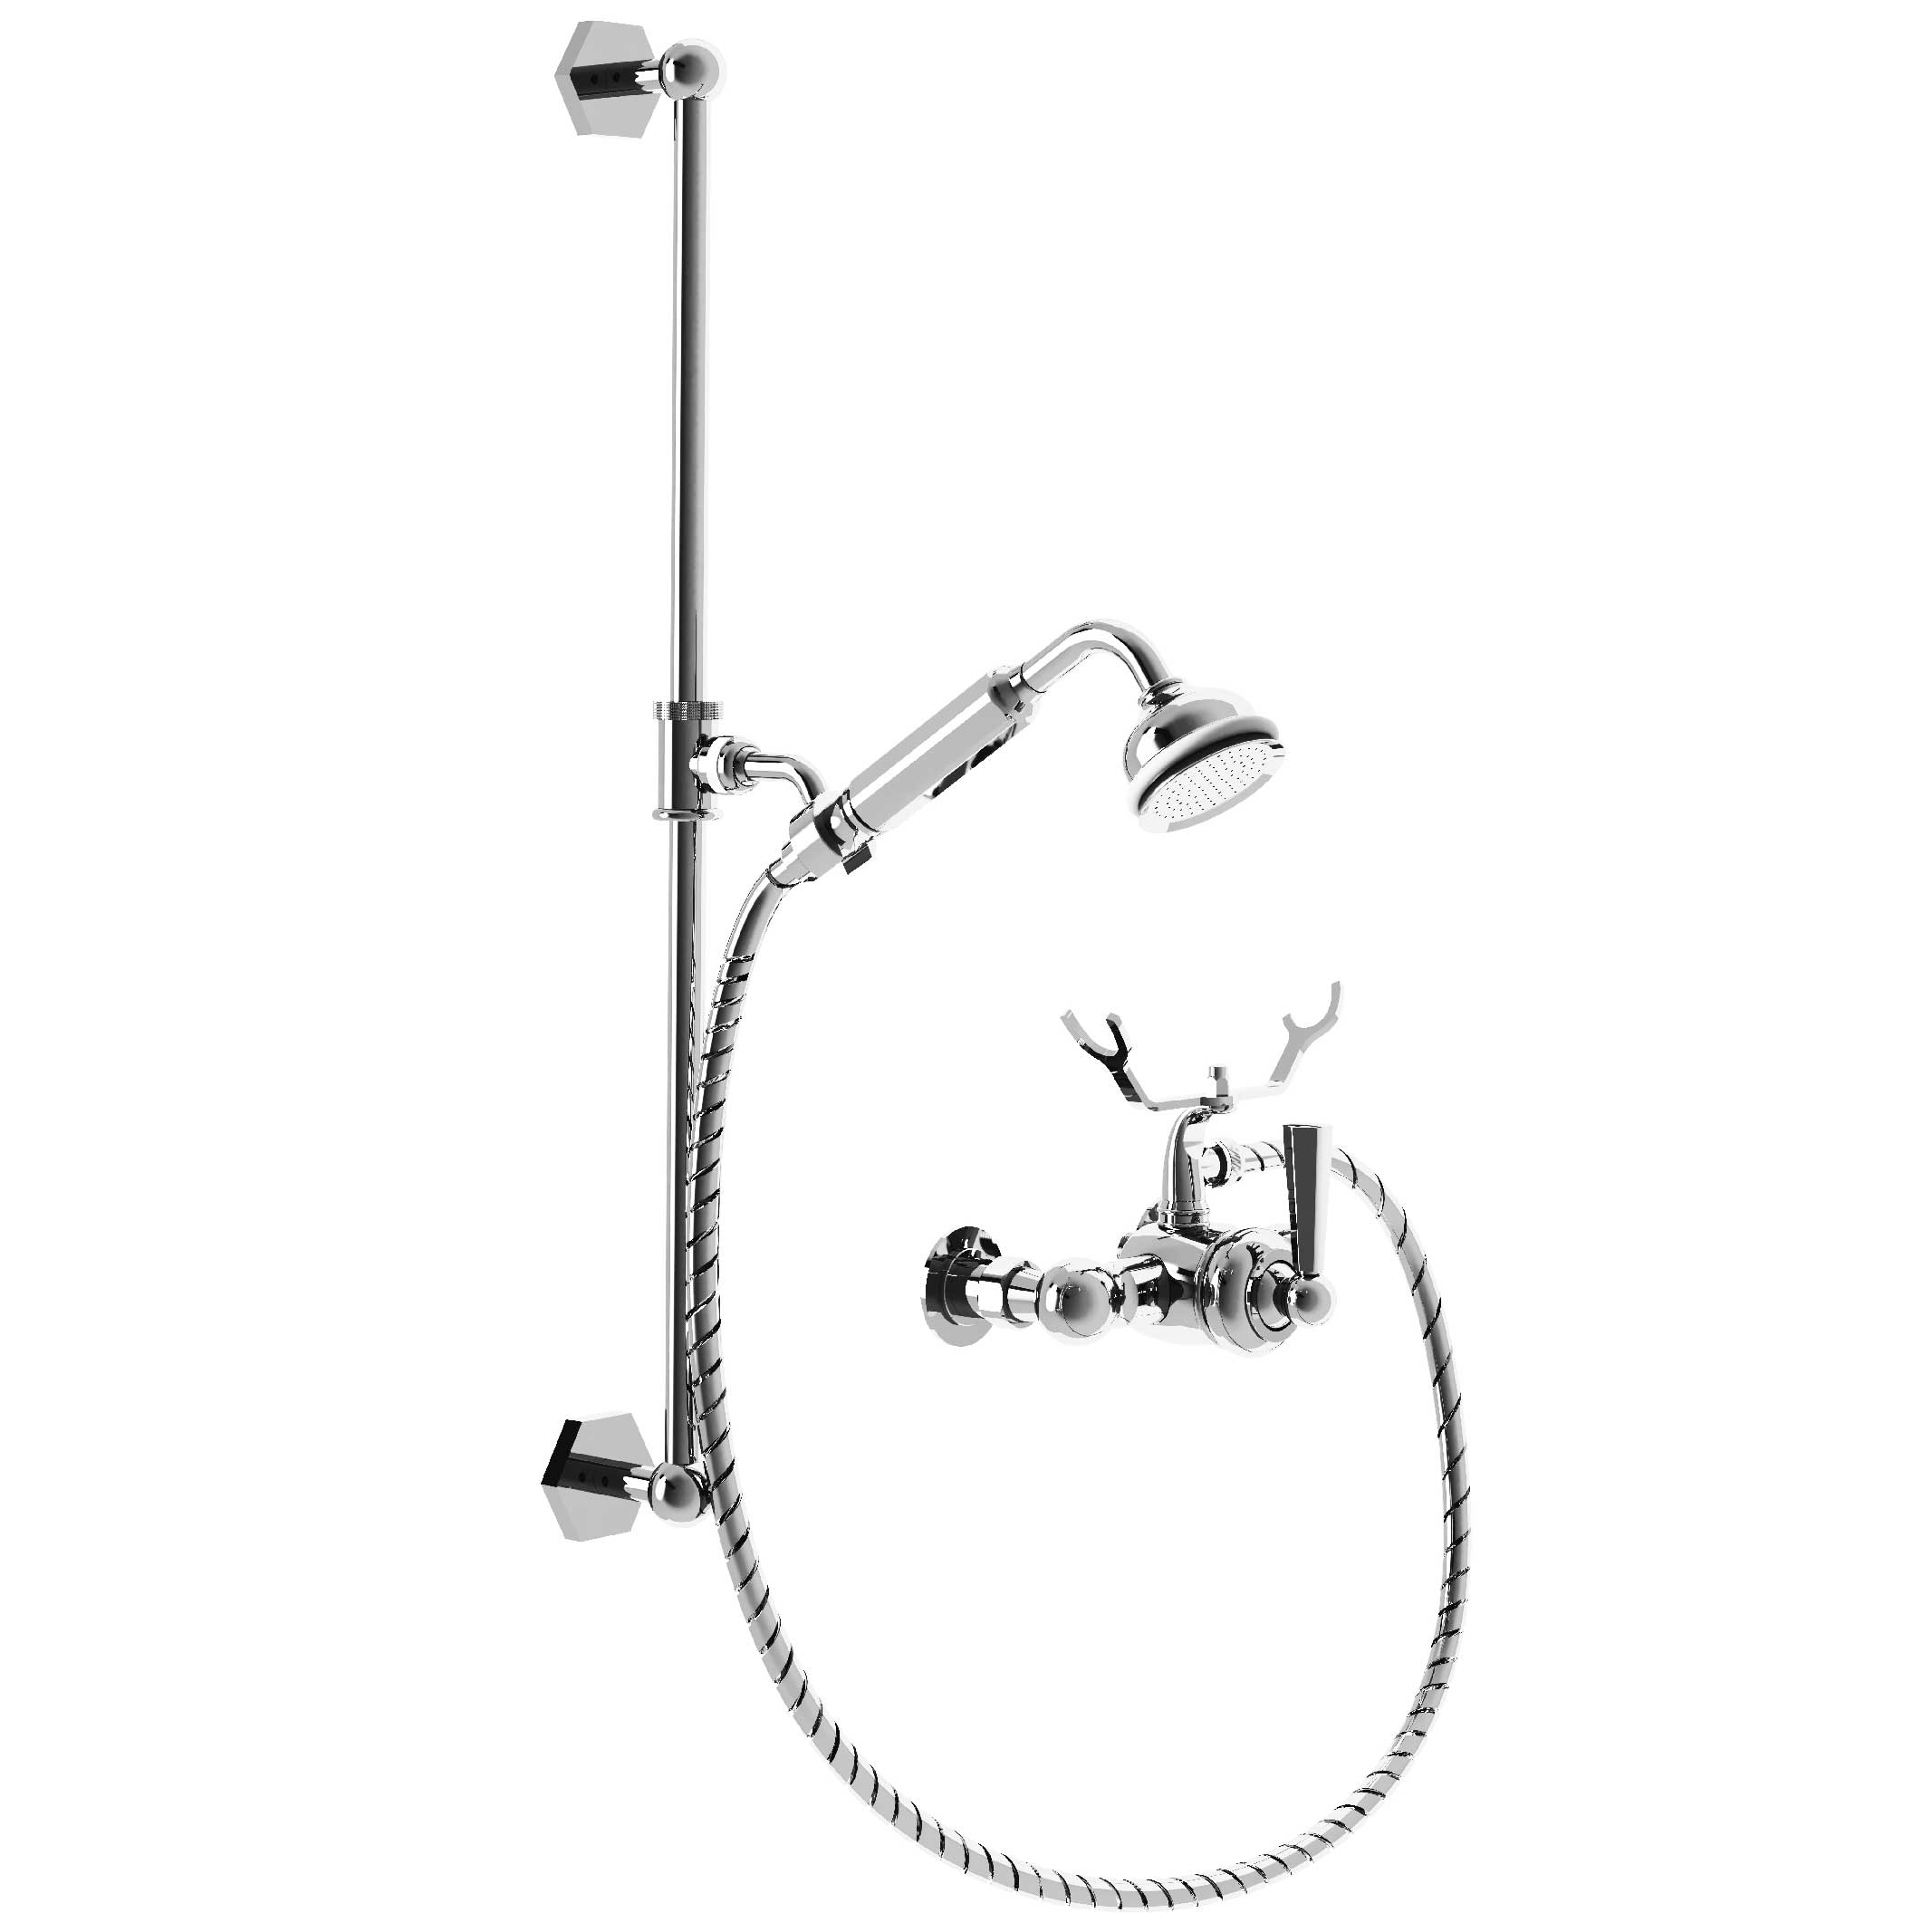 M13-2202M Single-lever shower mixer with sliding bar